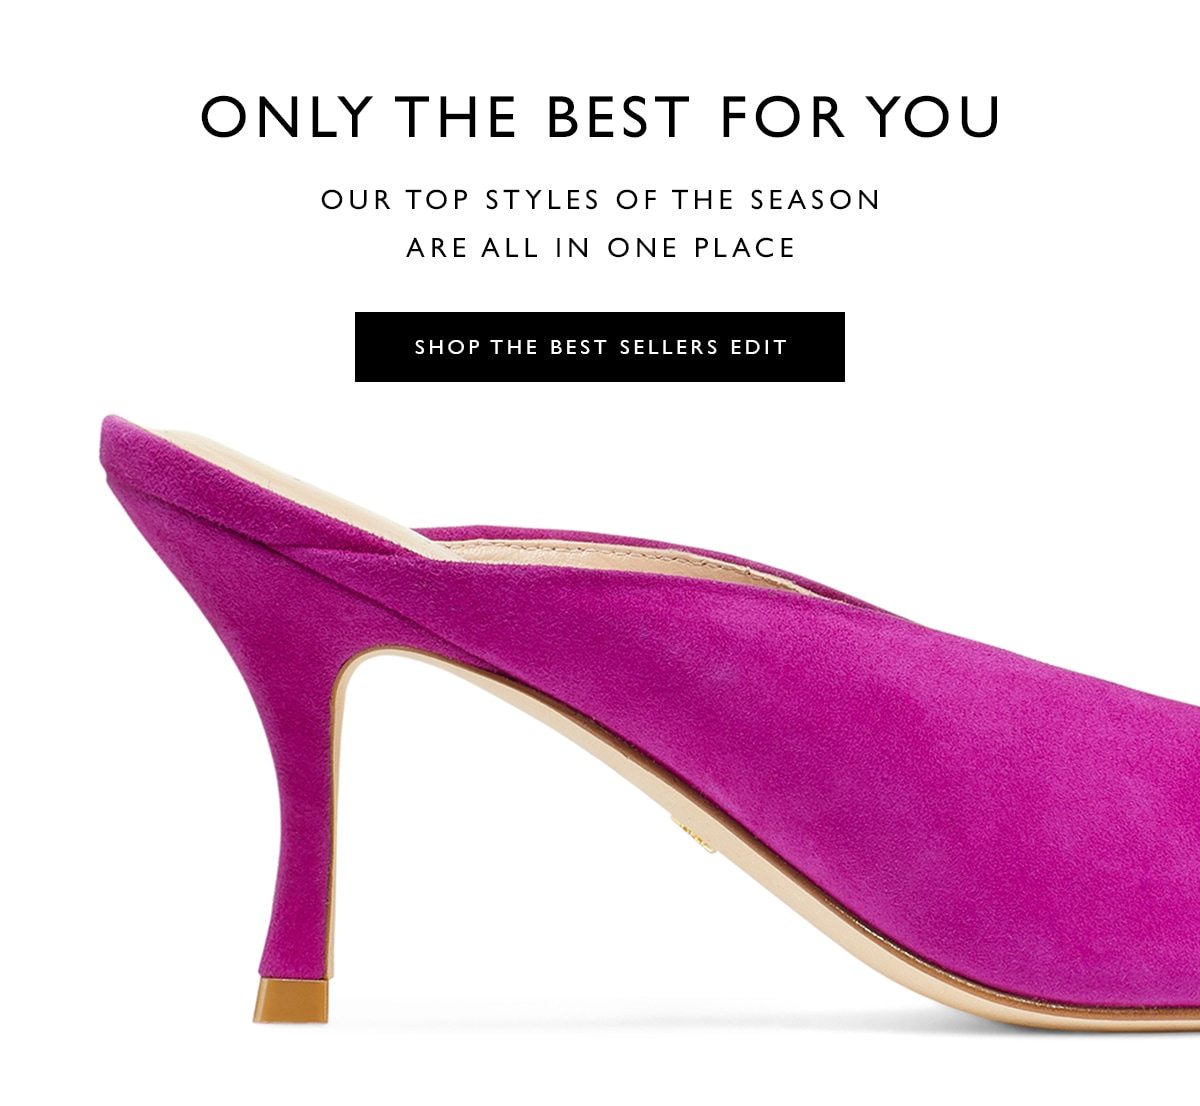 Only the best for you | Our top styles of the season are all in one place | Shop the best sellers edit